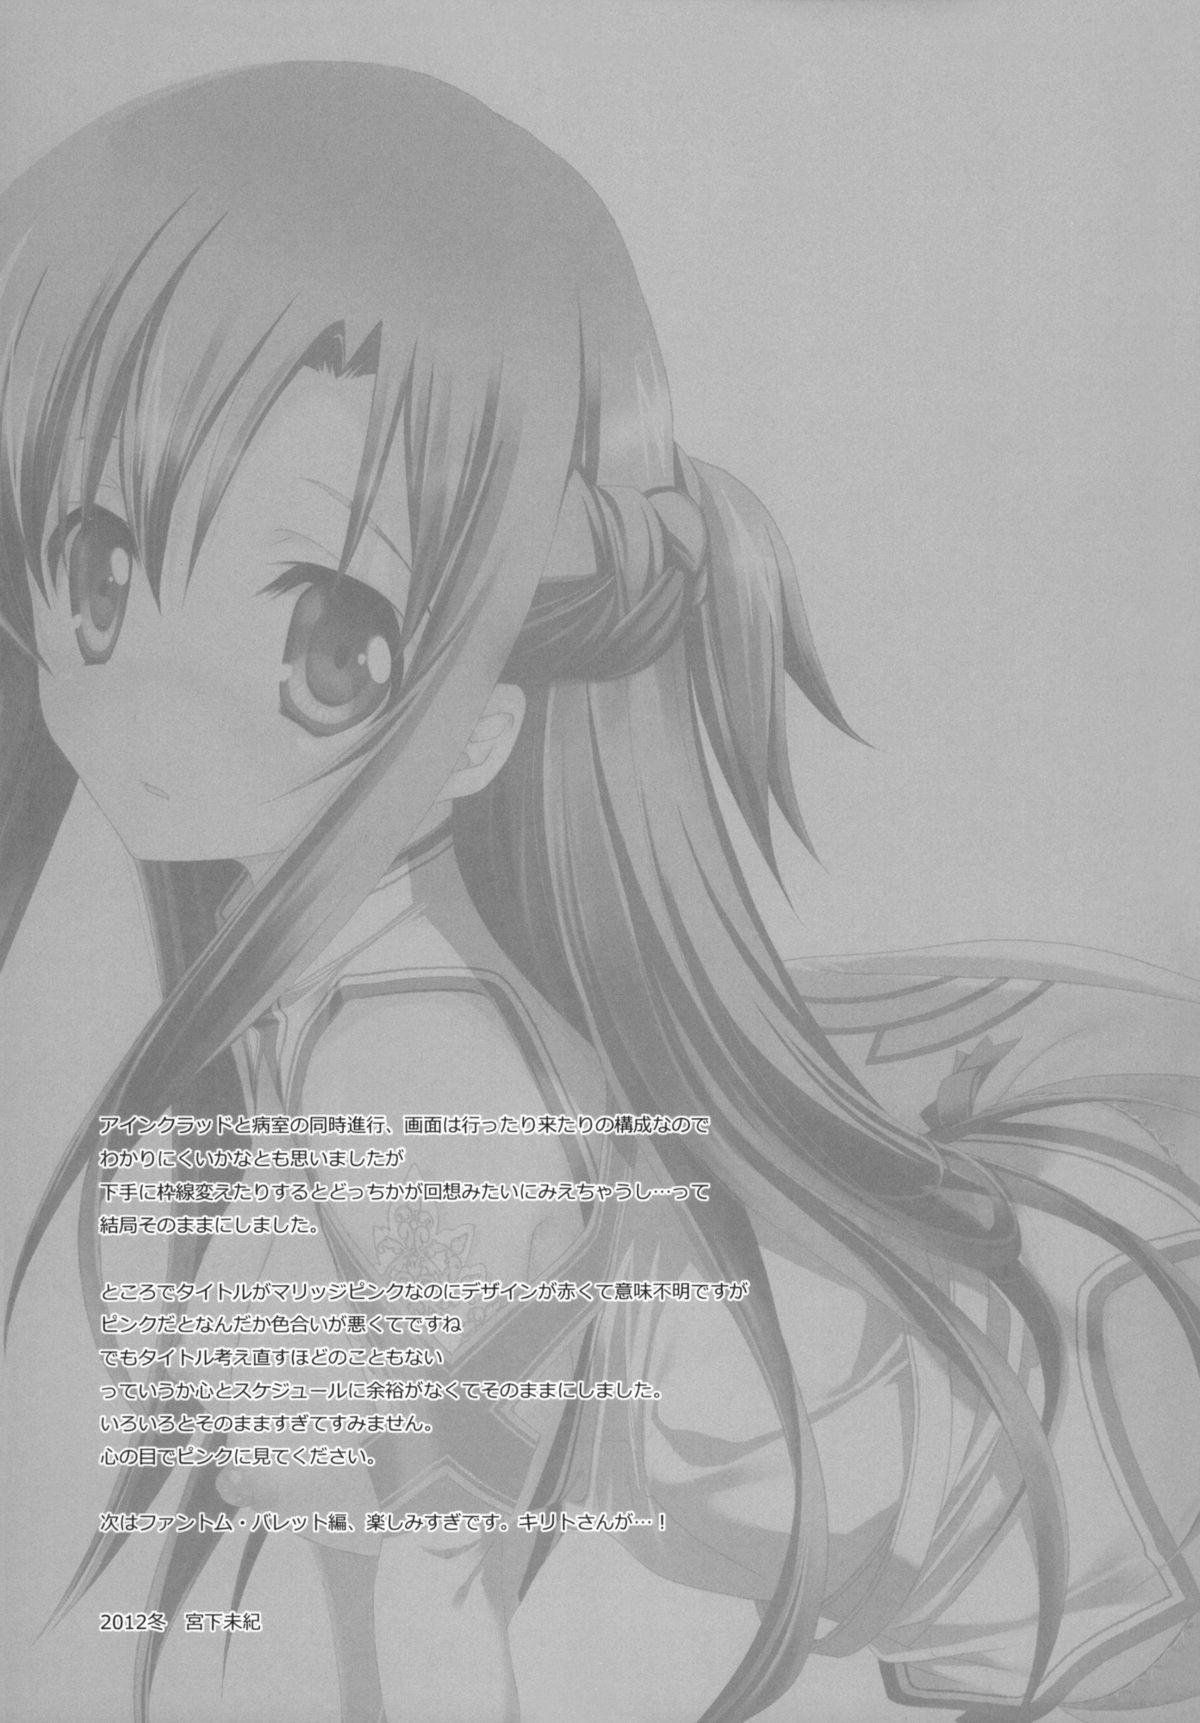 Tats MARRIAGE PINK - Sword art online Doctor Sex - Page 24